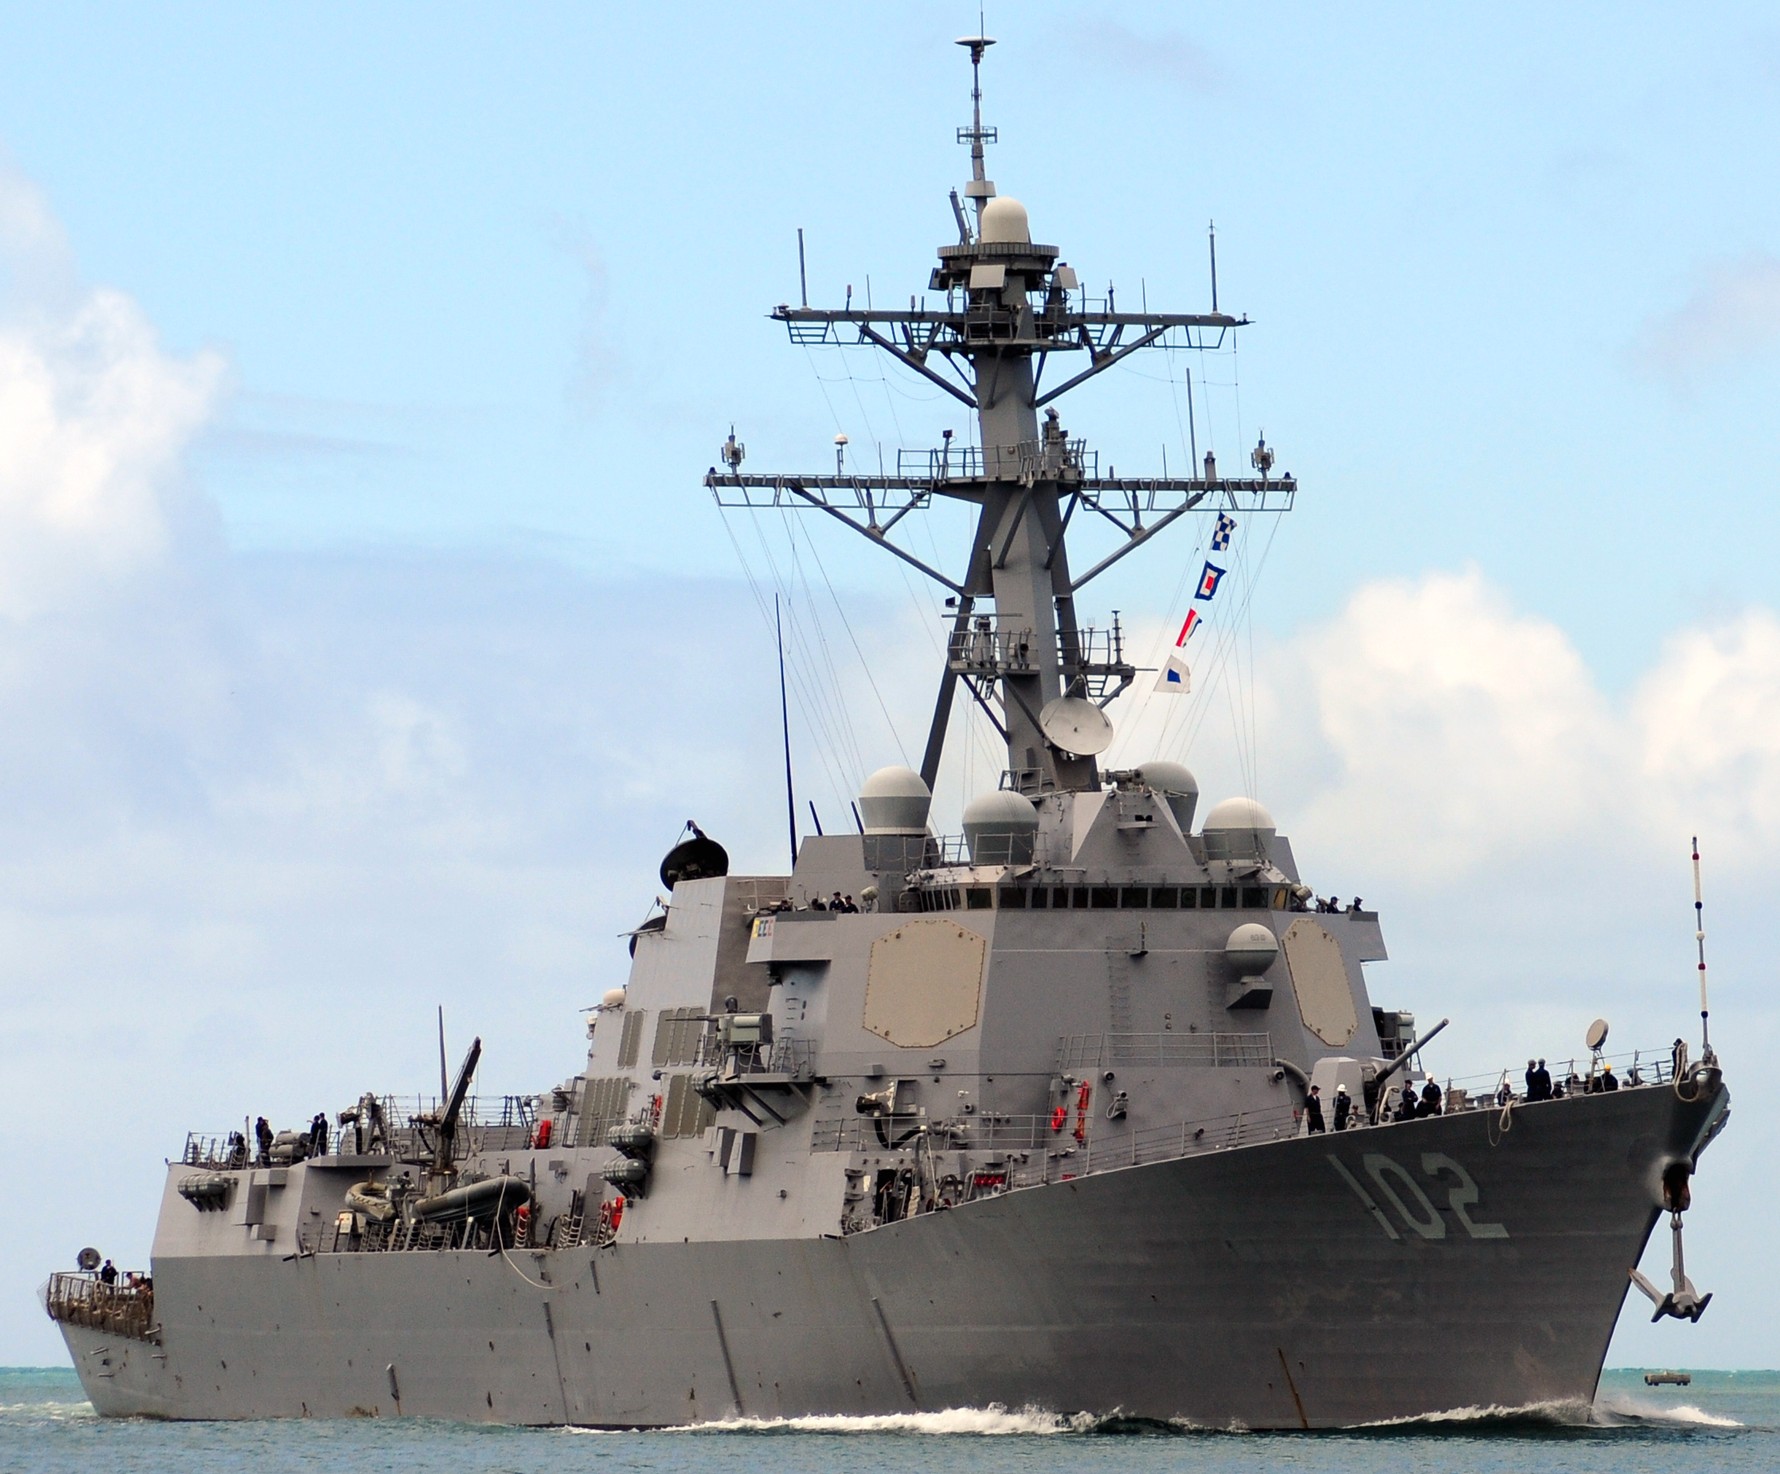 ddg-102 uss sampson guided missile destroyer 2010 30 pearl harbor hawaii